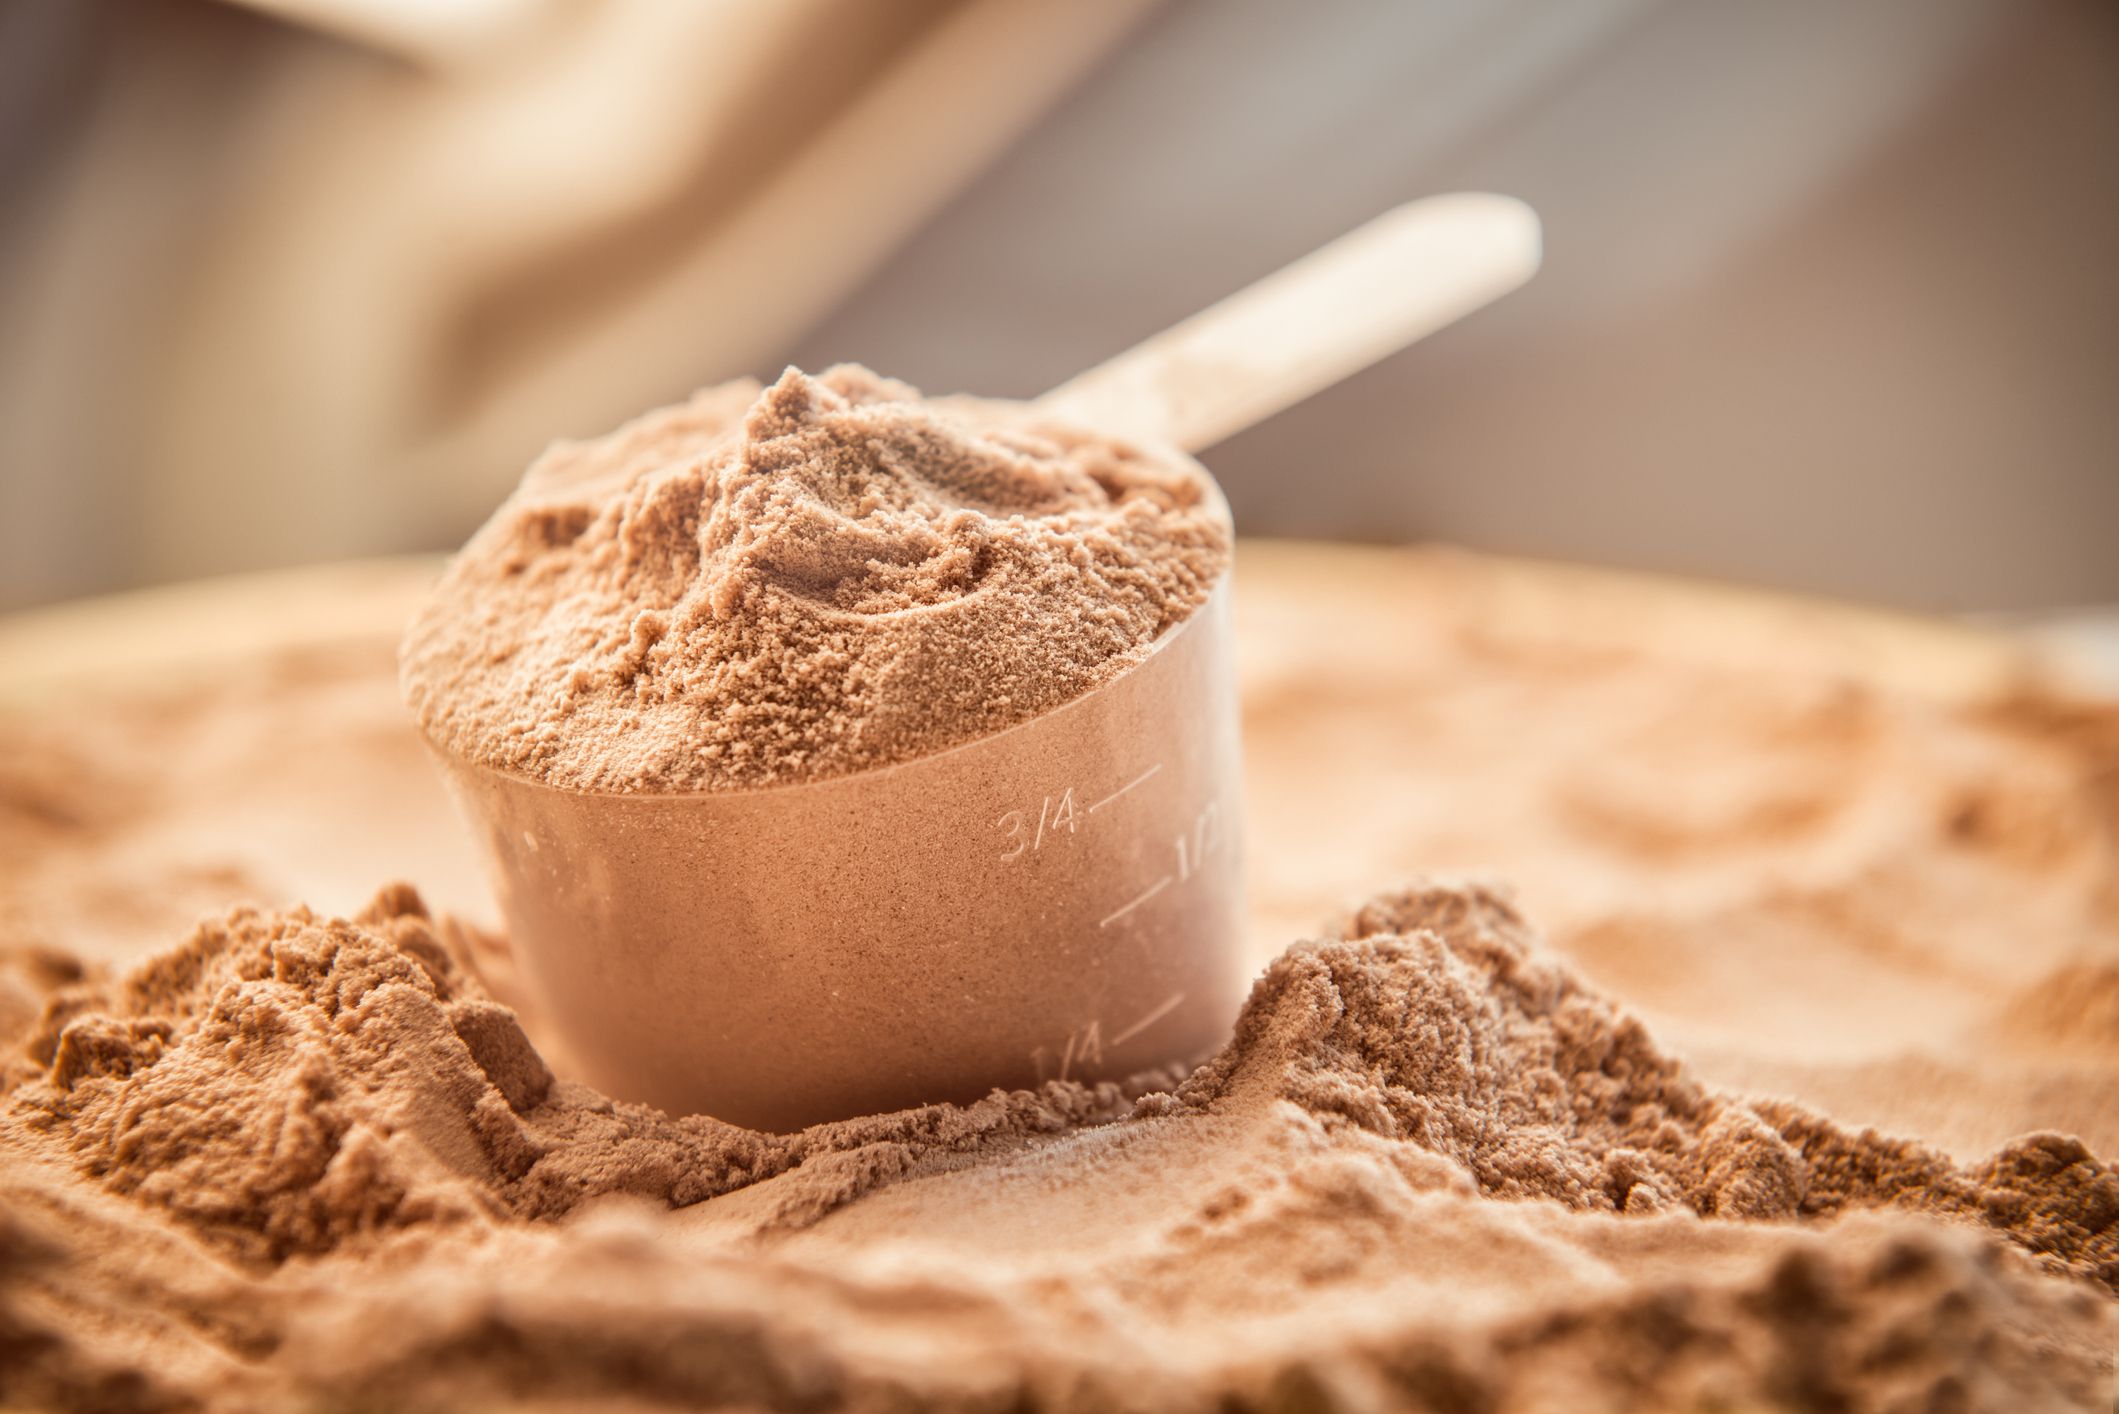 https://hips.hearstapps.com/hmg-prod/images/chocolate-whey-protein-powder-with-a-filled-scoop-royalty-free-image-1626898564.jpg